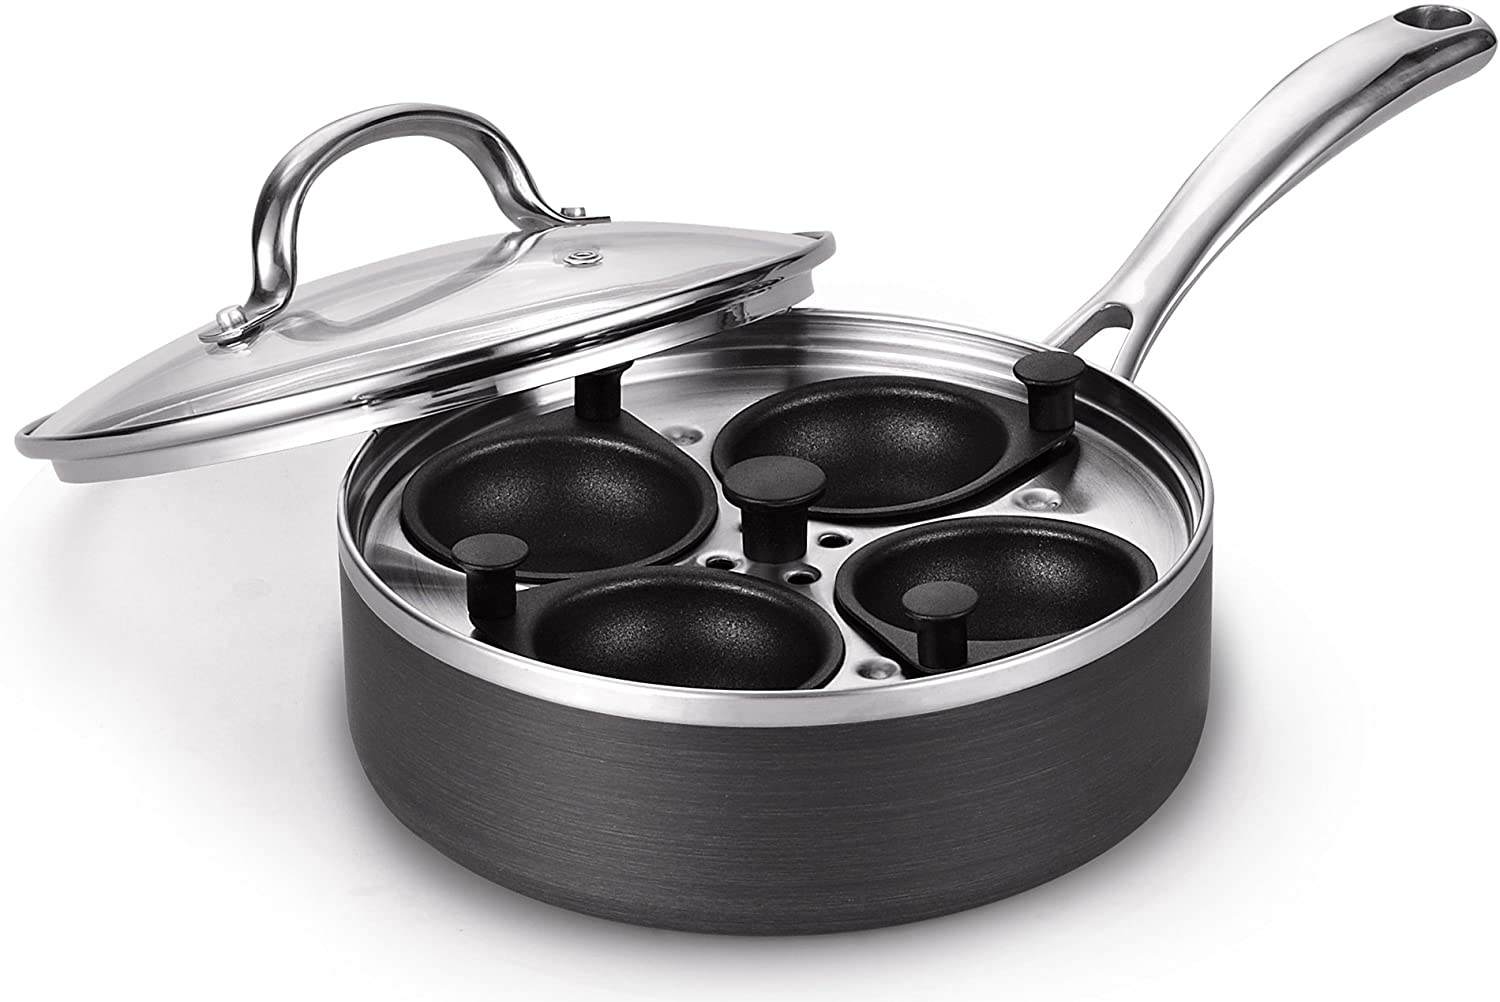 CASENCONTROS Egg Pan with Flipping Lid - Nonstick Egg Frying Pan [4 Cup Cooker] - Egg Pans Nonstick for Induction & GAS Cooker - Brush & Scraper